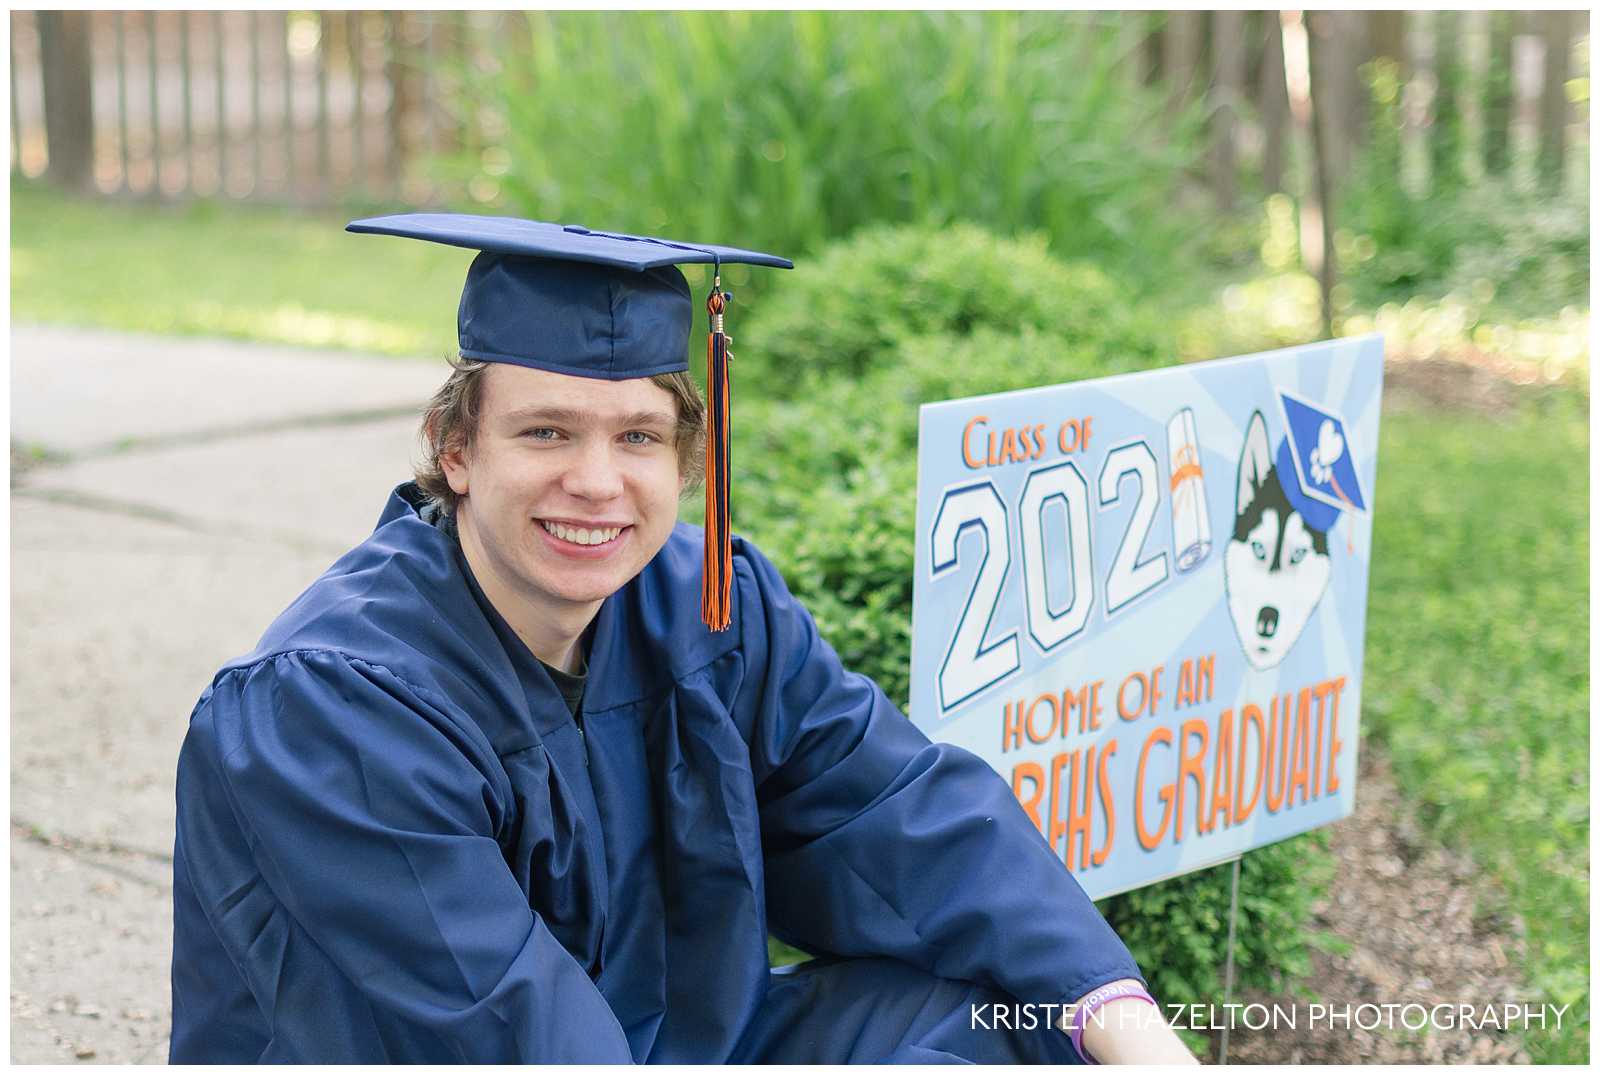 High school graduate sitting next to a "Class of 2021 Home of an OPRFHS Graduate" sign at an Oak Park, IL cap and gown photo shoot